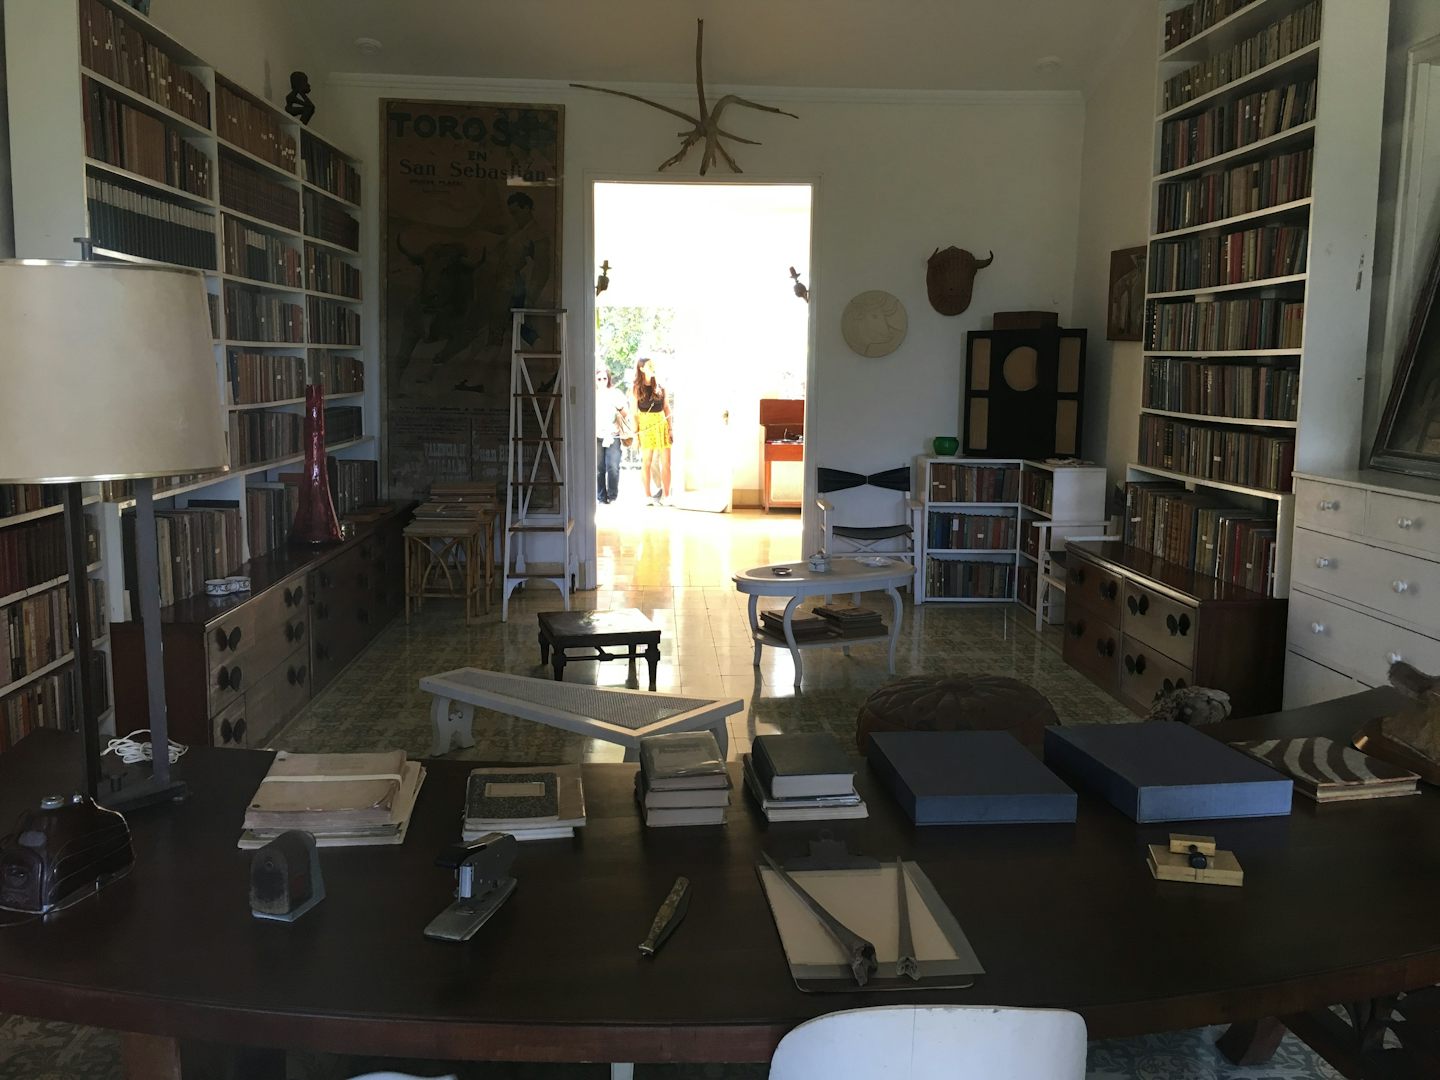 Hemingway's desk where he wrote Old Man and the Sea and For Whom the Be